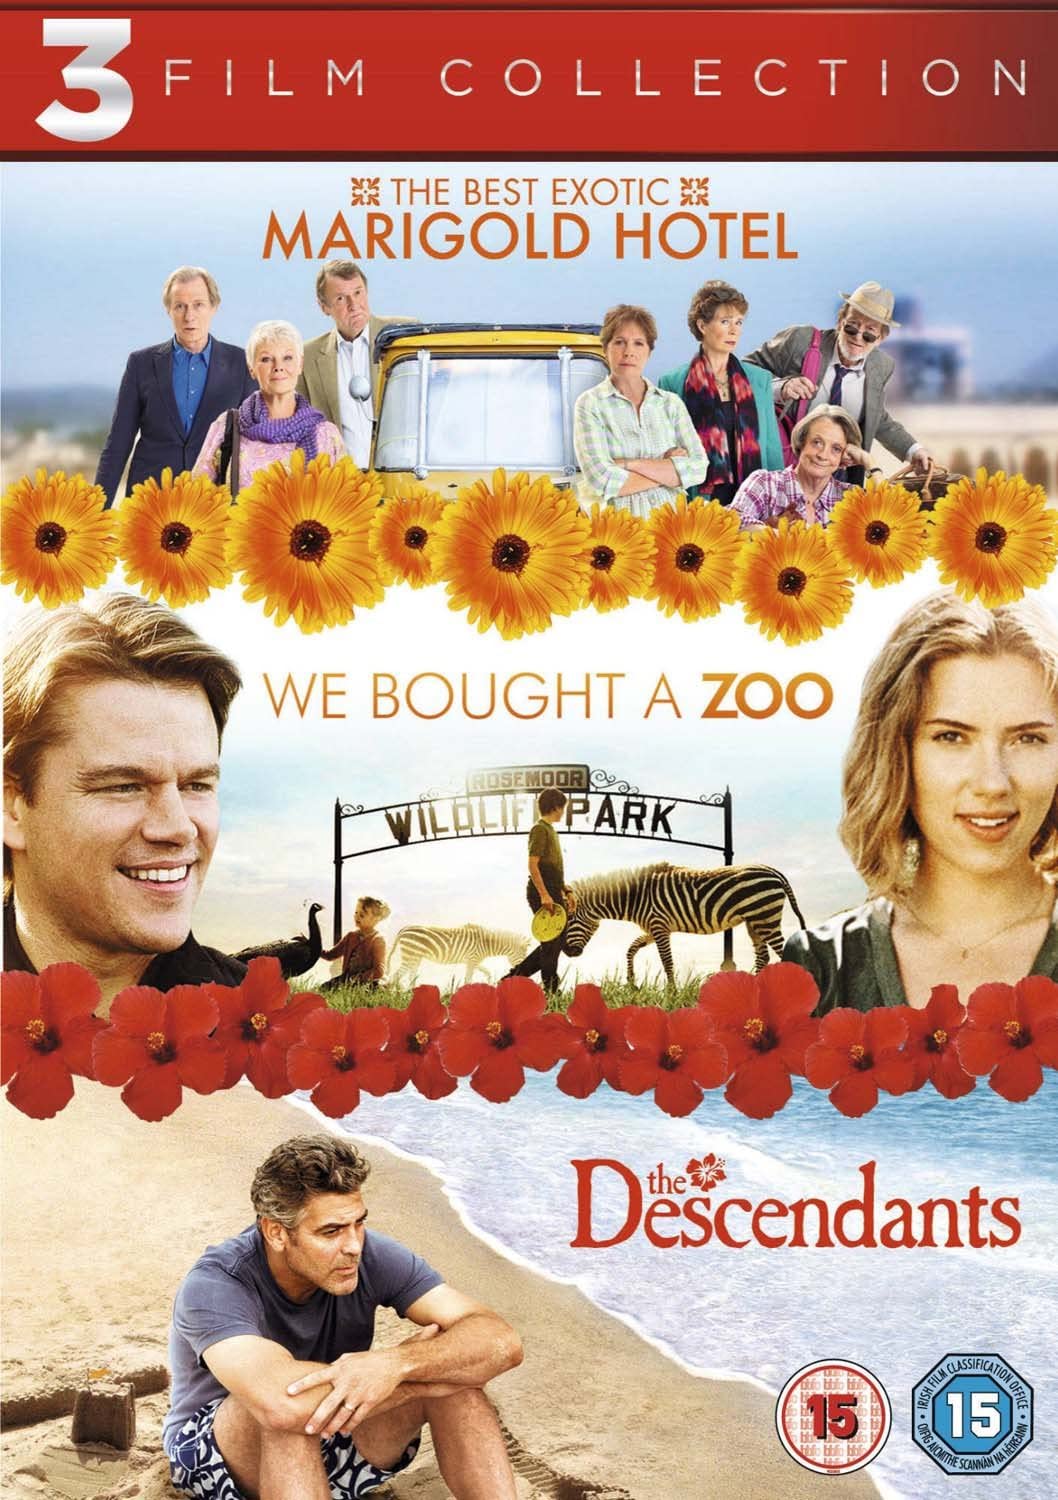 The Best Exotic Marigold Hotel / We Bought a Zoo / The Descendants [2011] - Comedy/Drama [DVD]